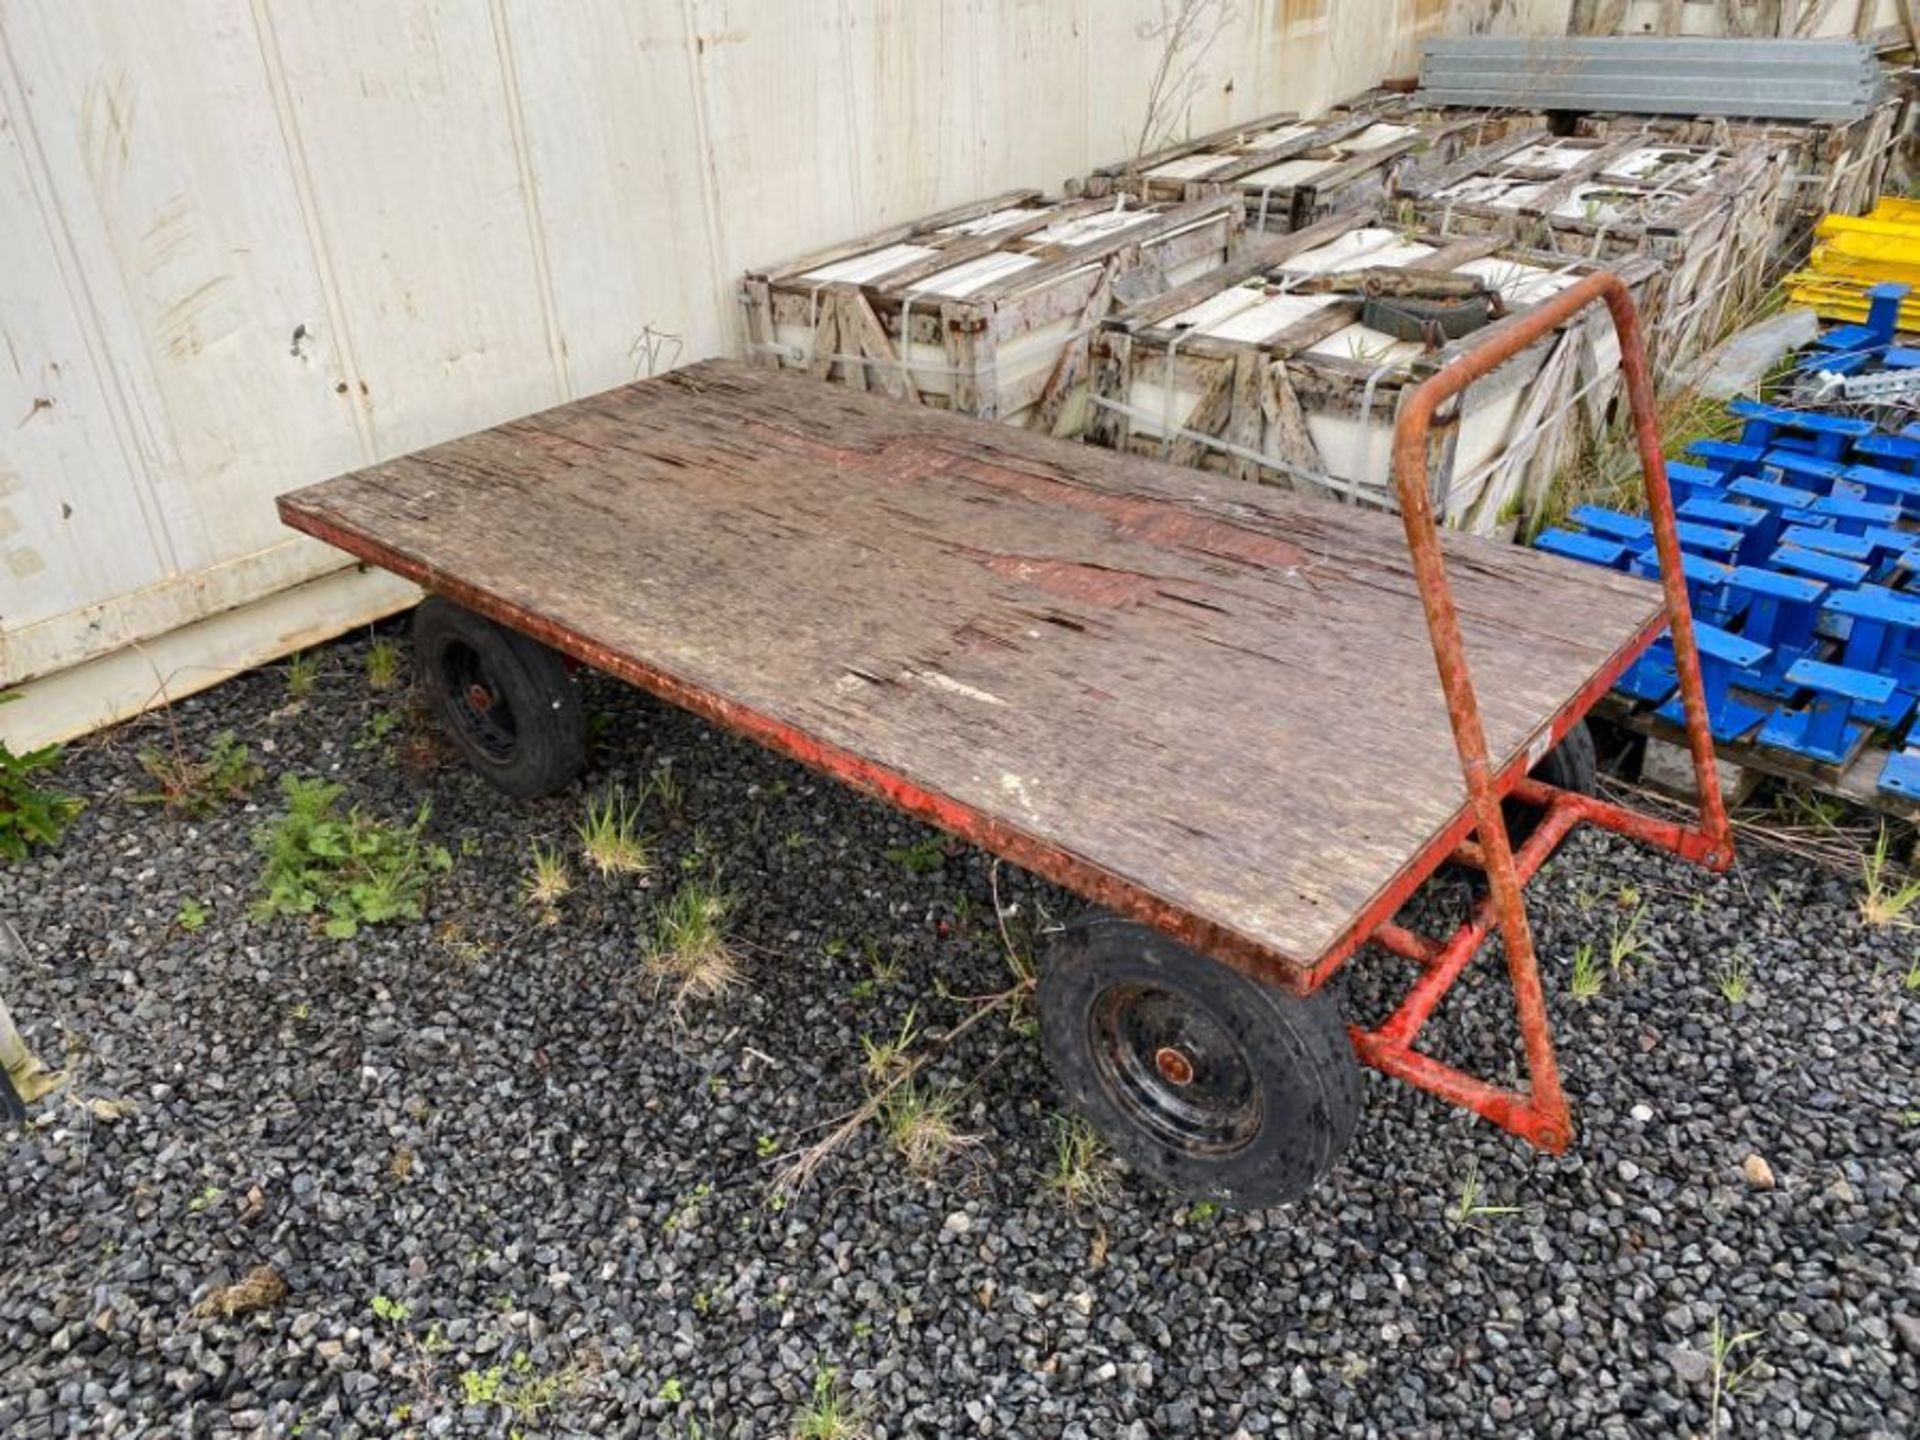 RED 4-WHEELED PLATFORM TROLLEY (79" X 40") - Image 2 of 4